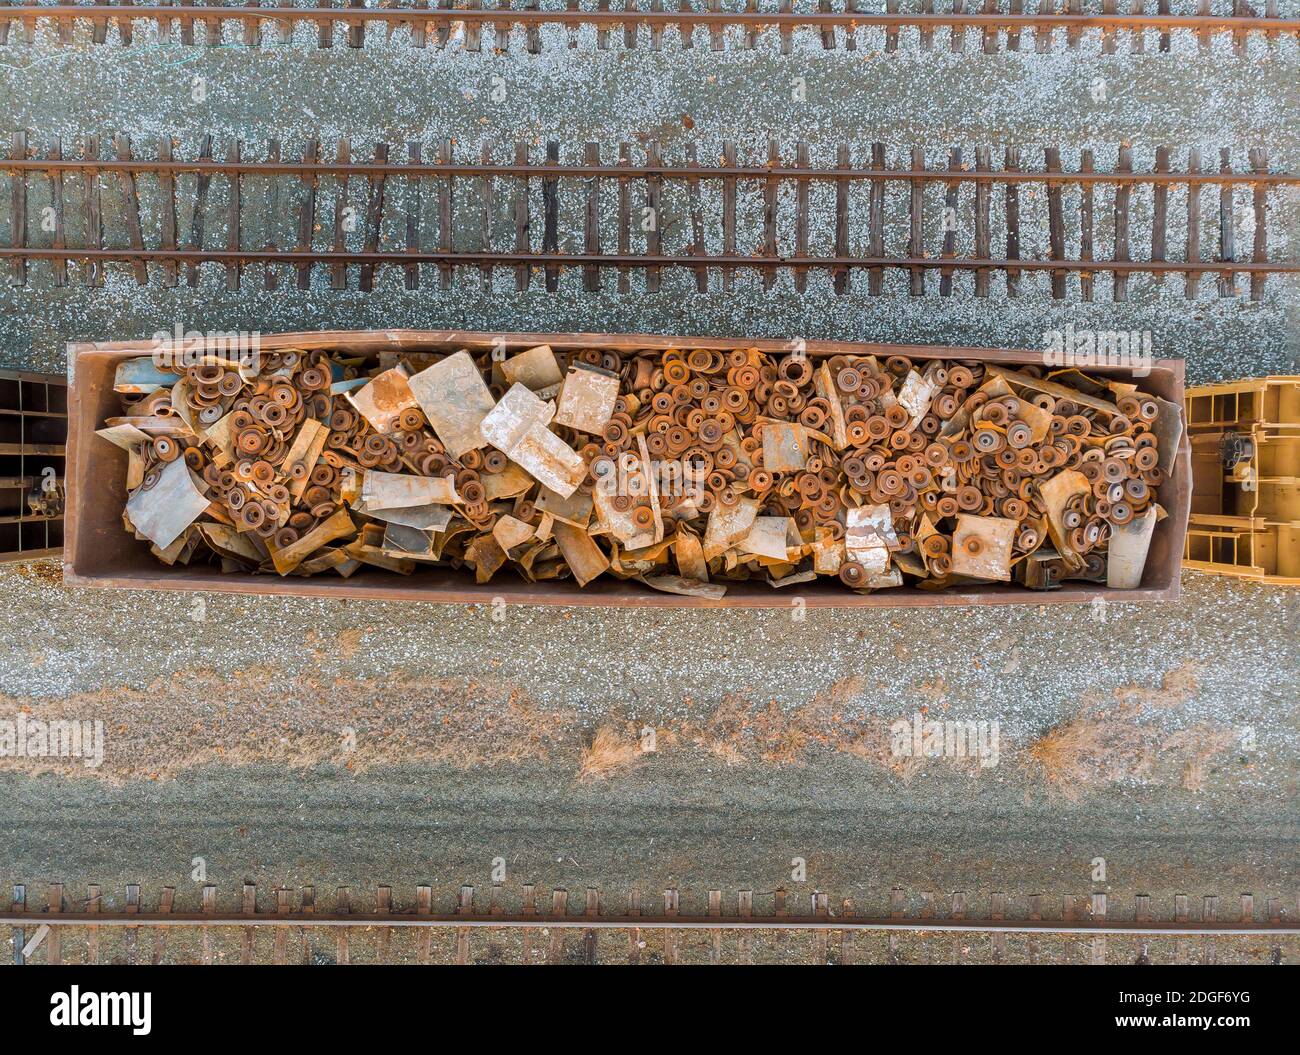 Scrap metal iron from many things in wagons. Stock Photo